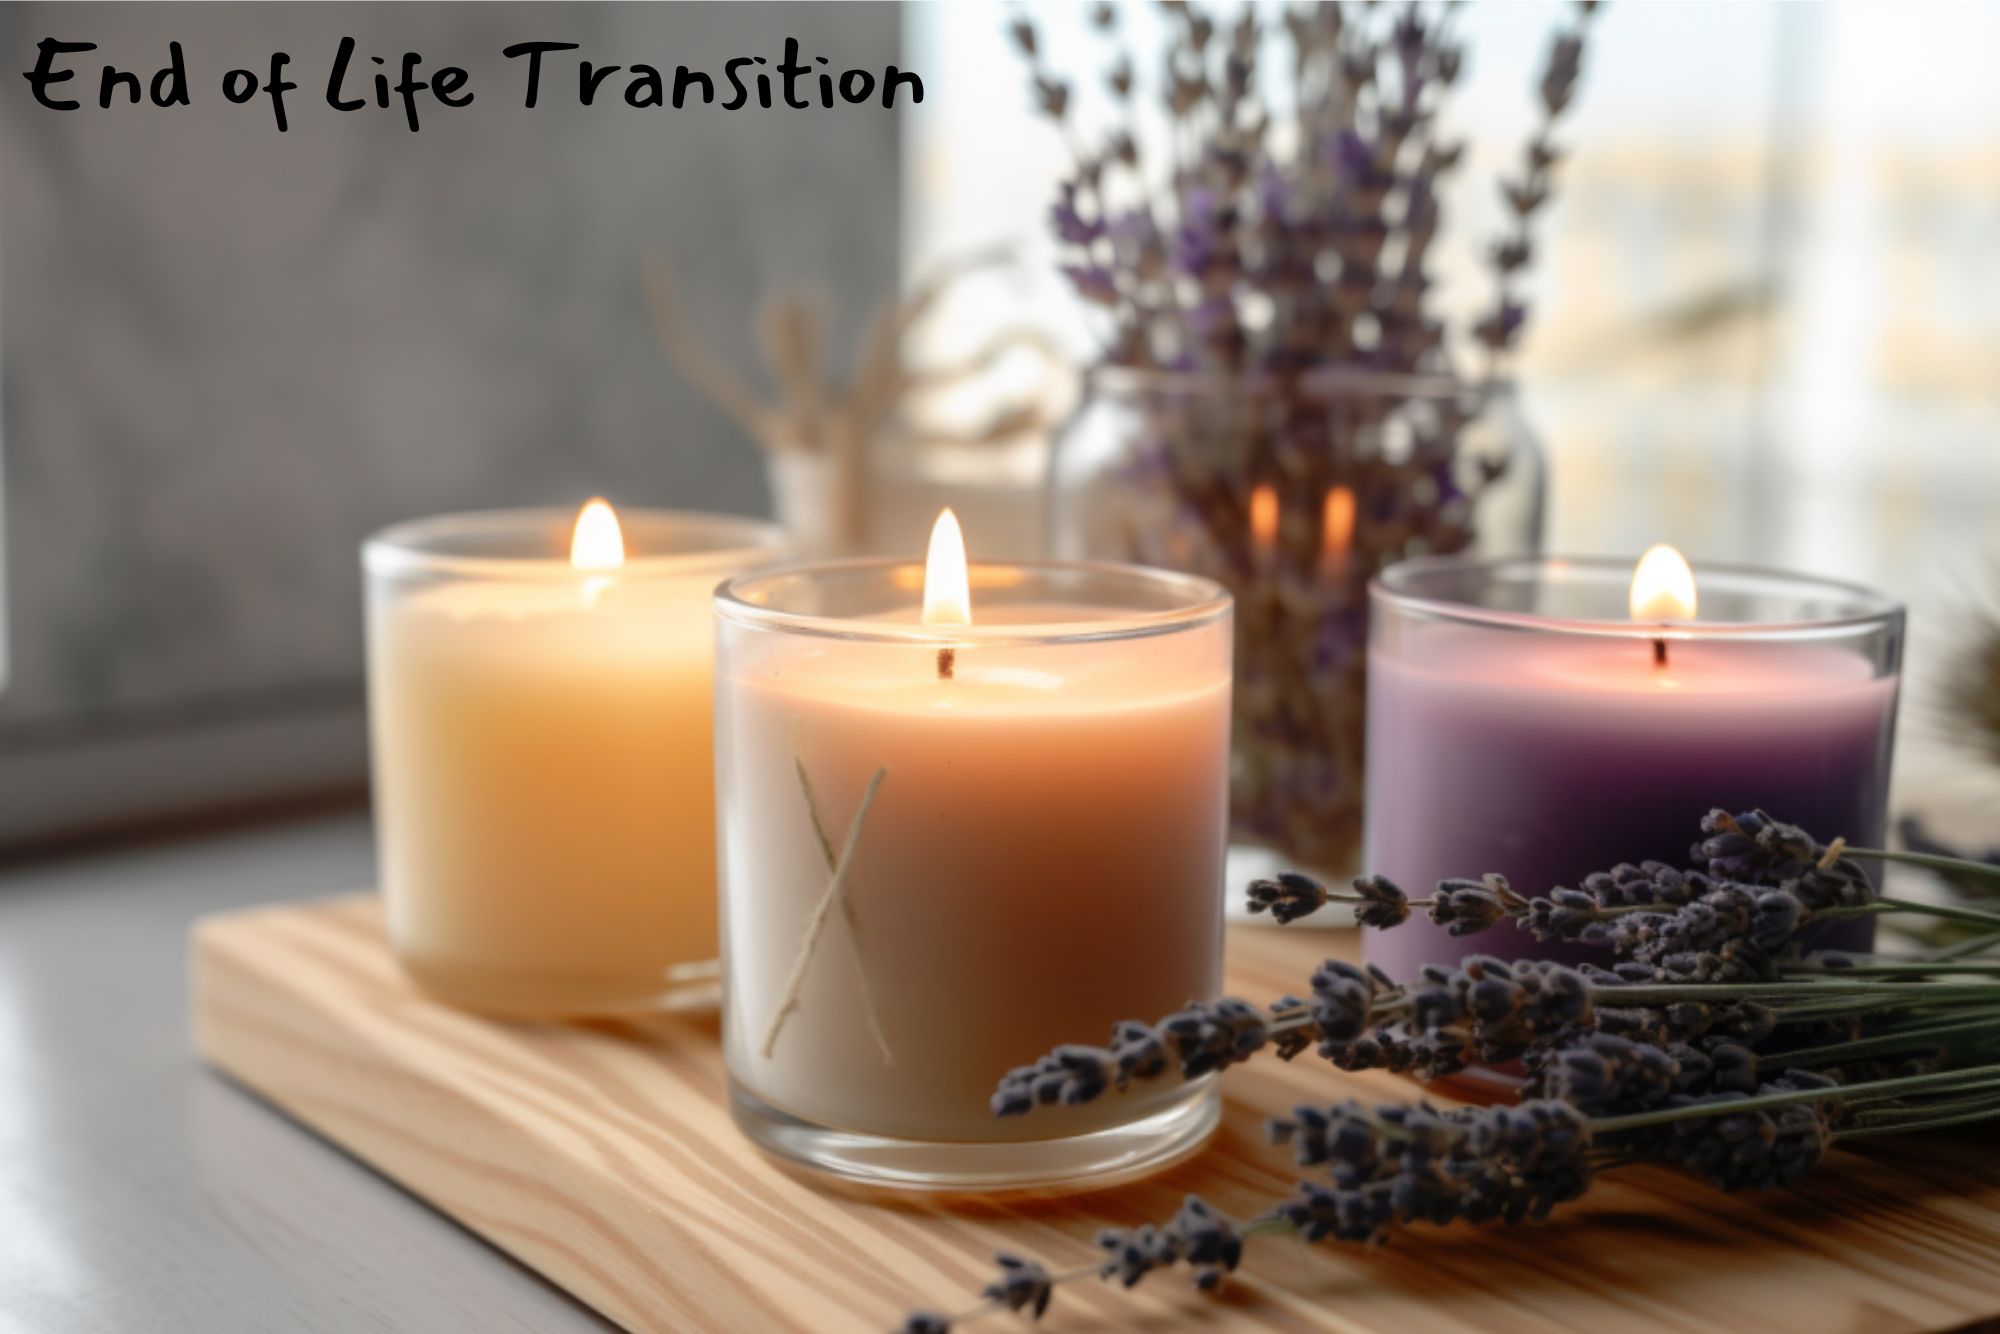 End-of-Life Transition